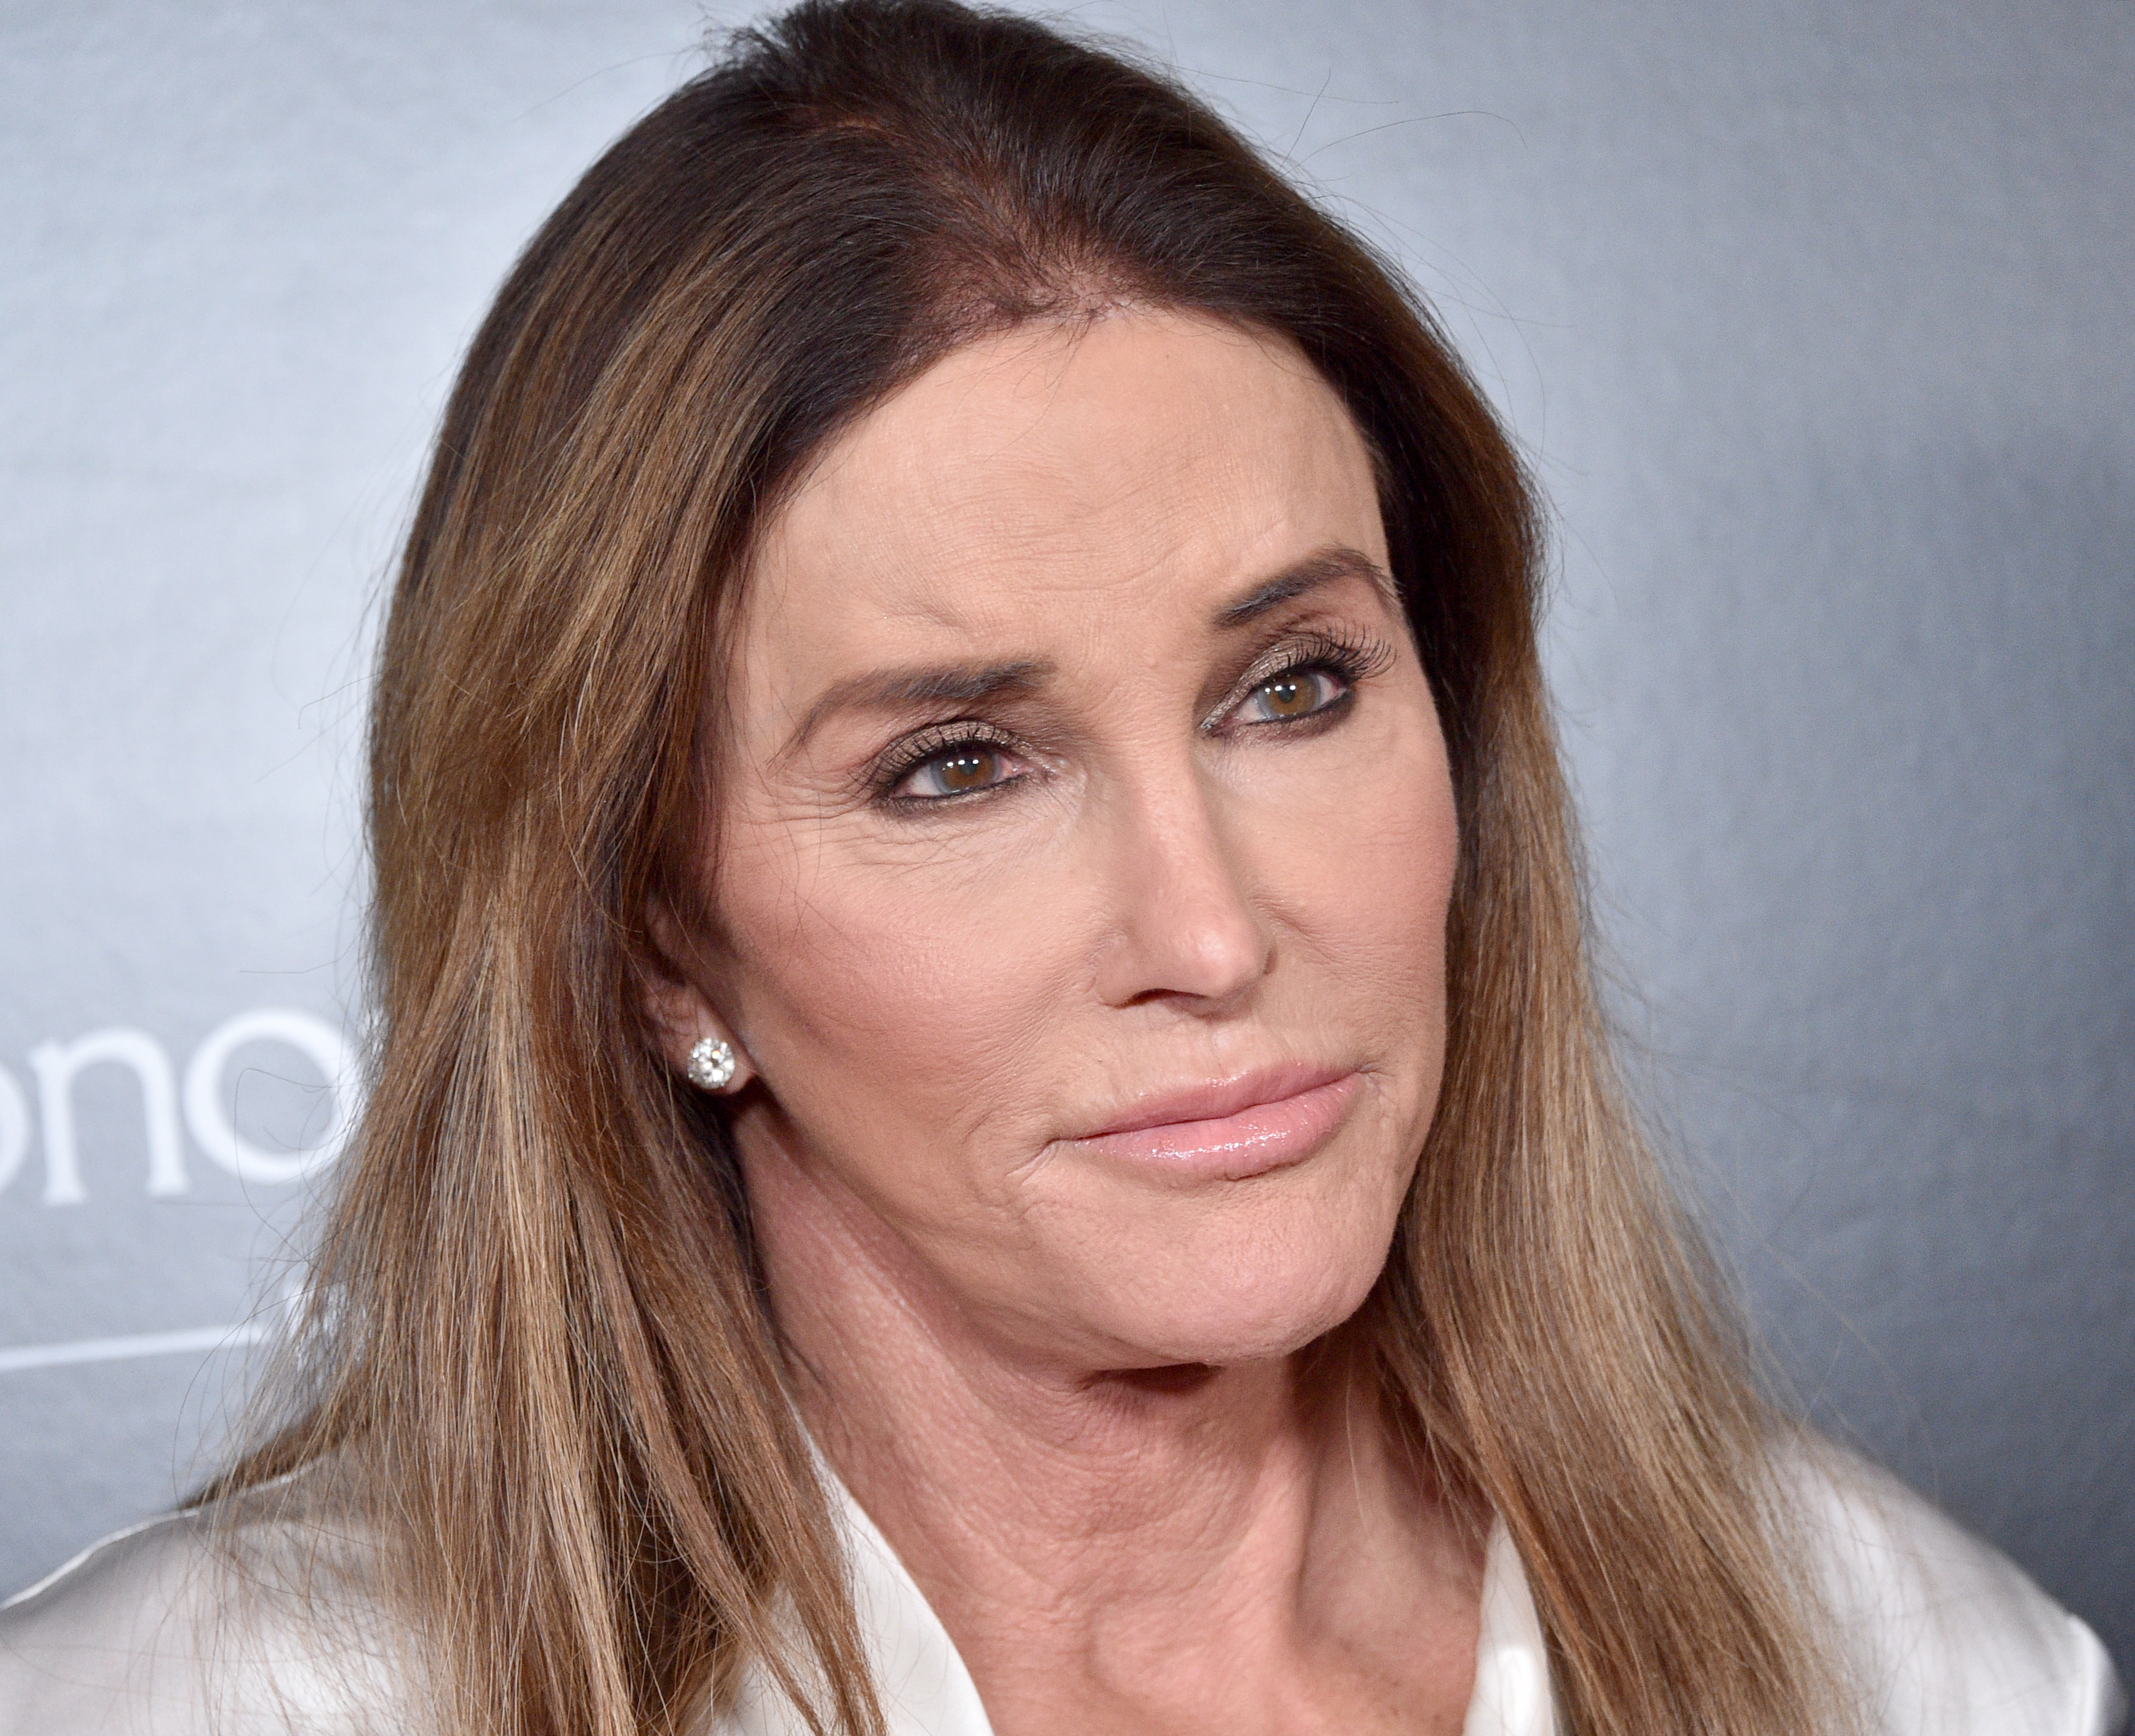 Caitlyn Jenner Announces Calif. Governor's Run: 'I'm In!' – CBS Los Angeles